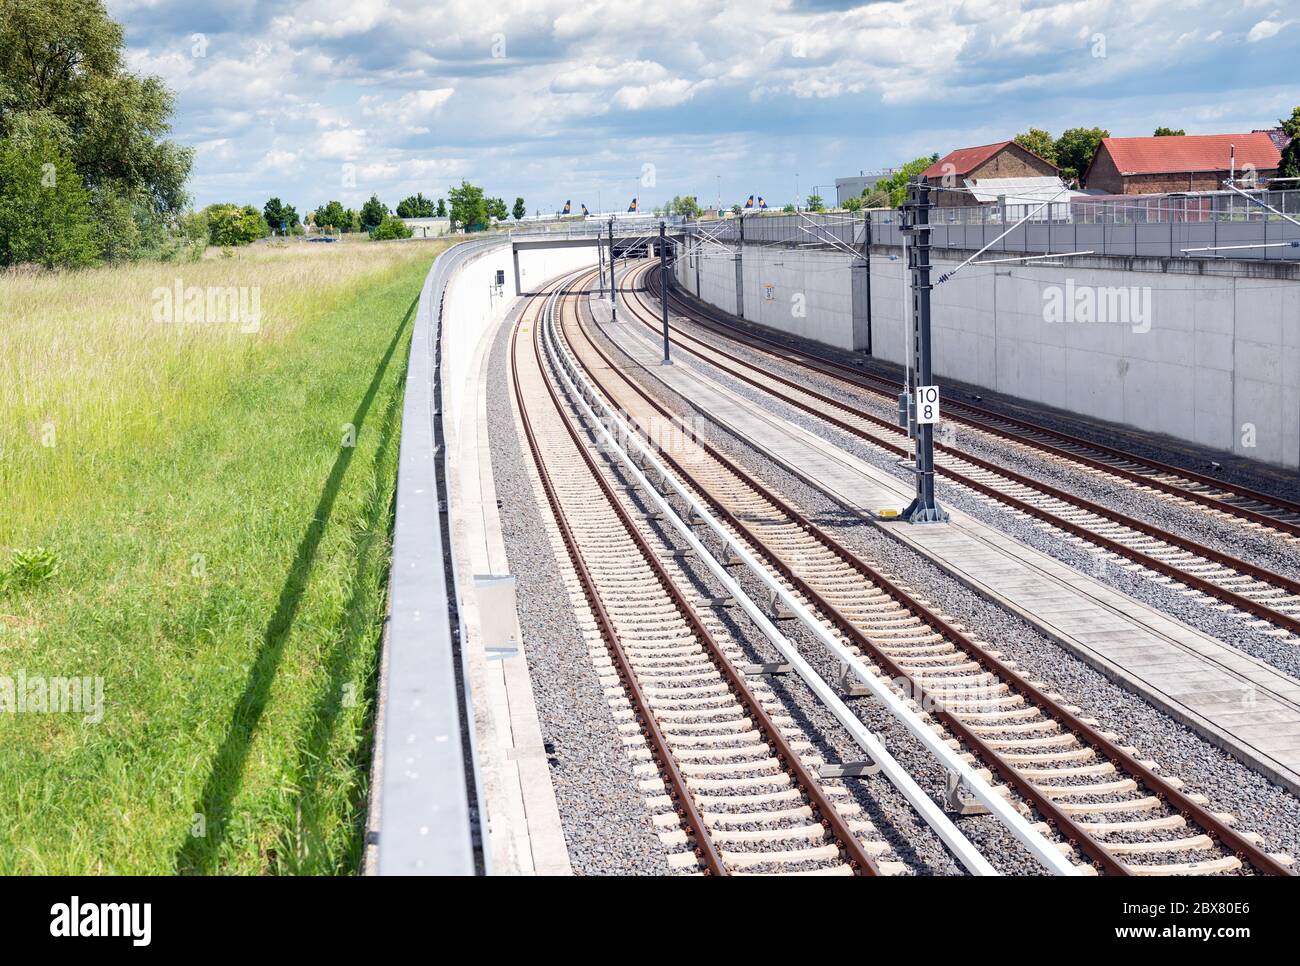 https://c8.alamy.com/comp/2BX80E6/potsdam-germany-02nd-june-2020-the-rails-of-the-s-bahn-l-and-the-regional-railway-lead-into-a-tunnel-to-the-underground-station-of-the-capital-airport-in-the-background-off-the-tarmac-there-are-aircraft-of-the-airline-lufthansa-credit-soeren-stachedpa-zentralbildzbdpaalamy-live-news-2BX80E6.jpg